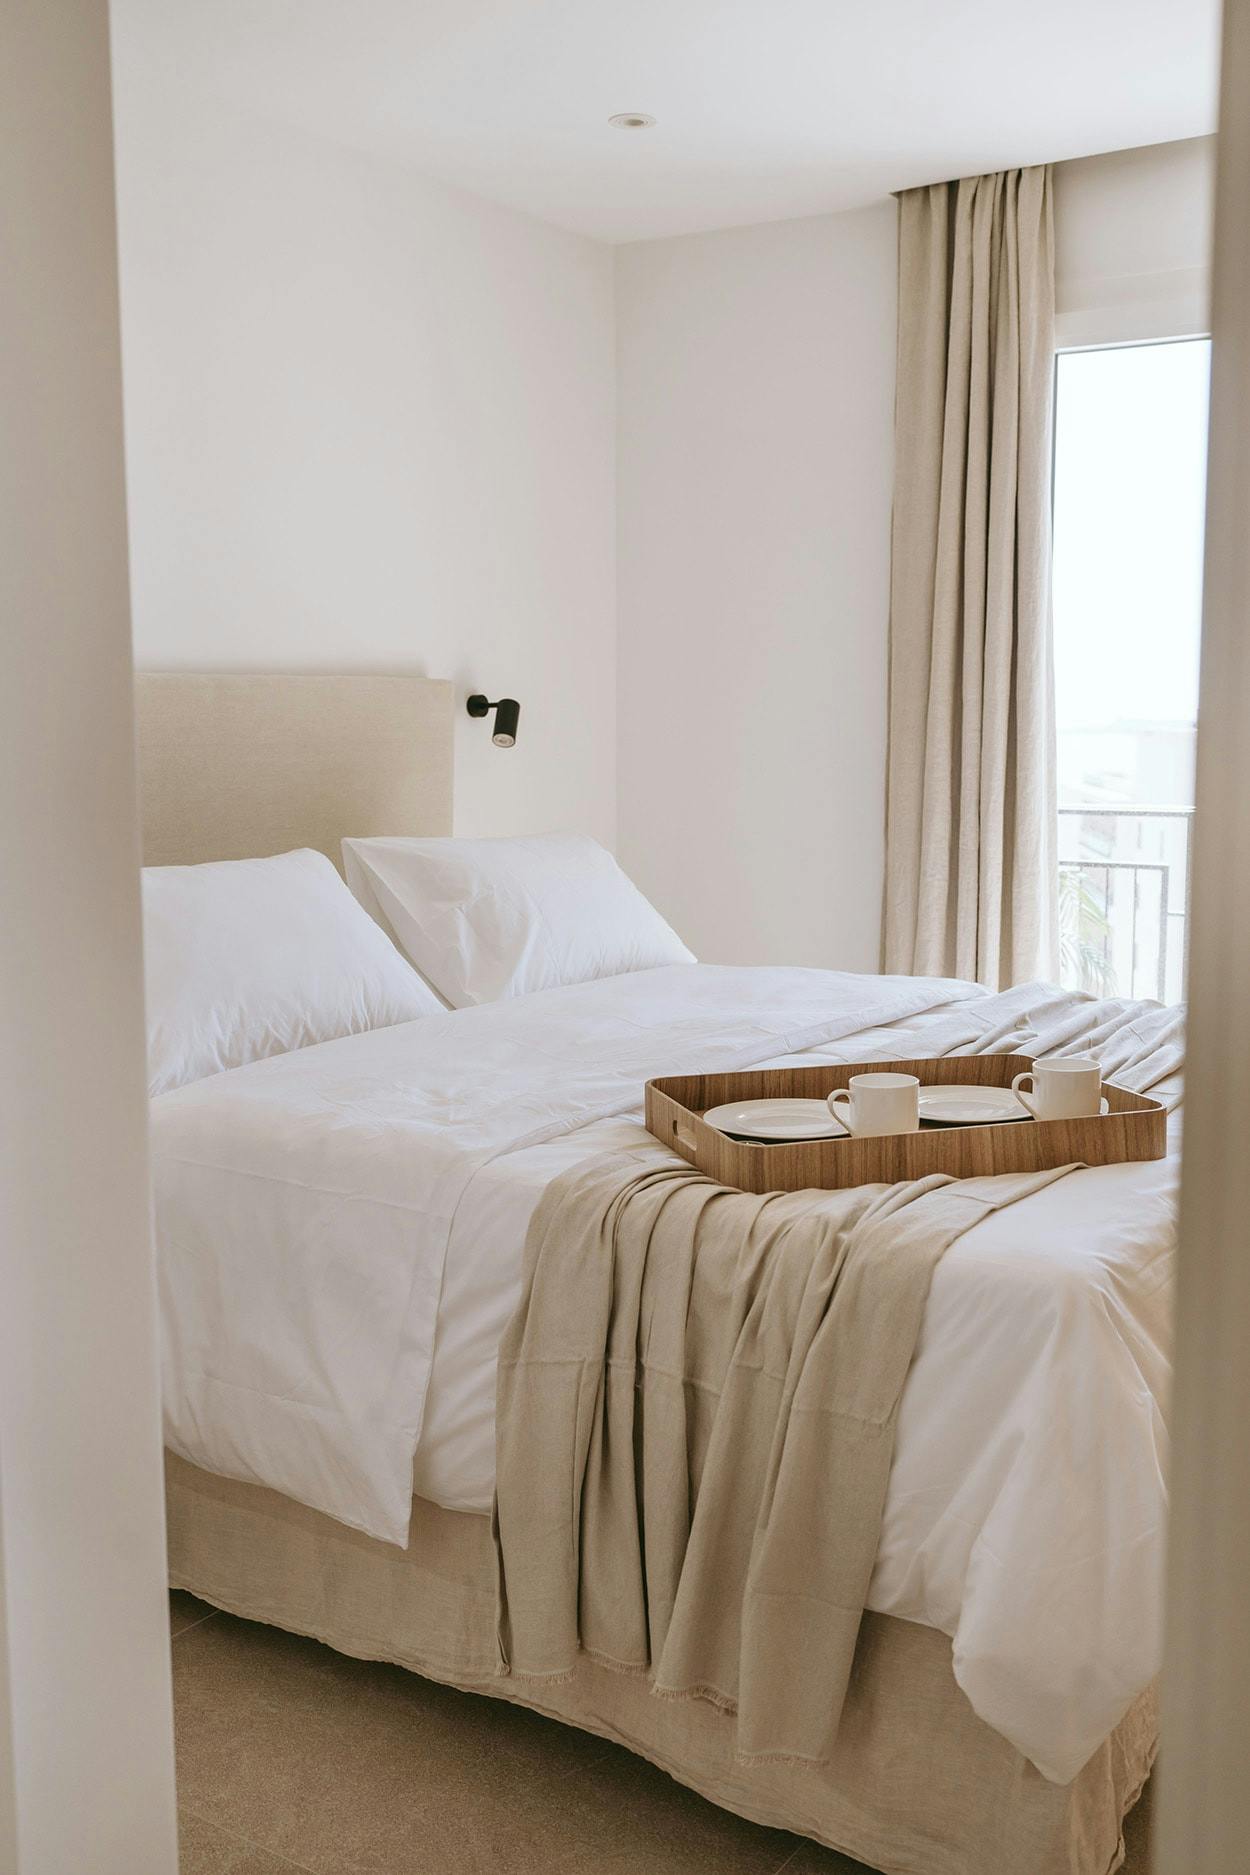 The image features a large, well-made bed with a white comforter and a white headboard, placed in a room with a window.